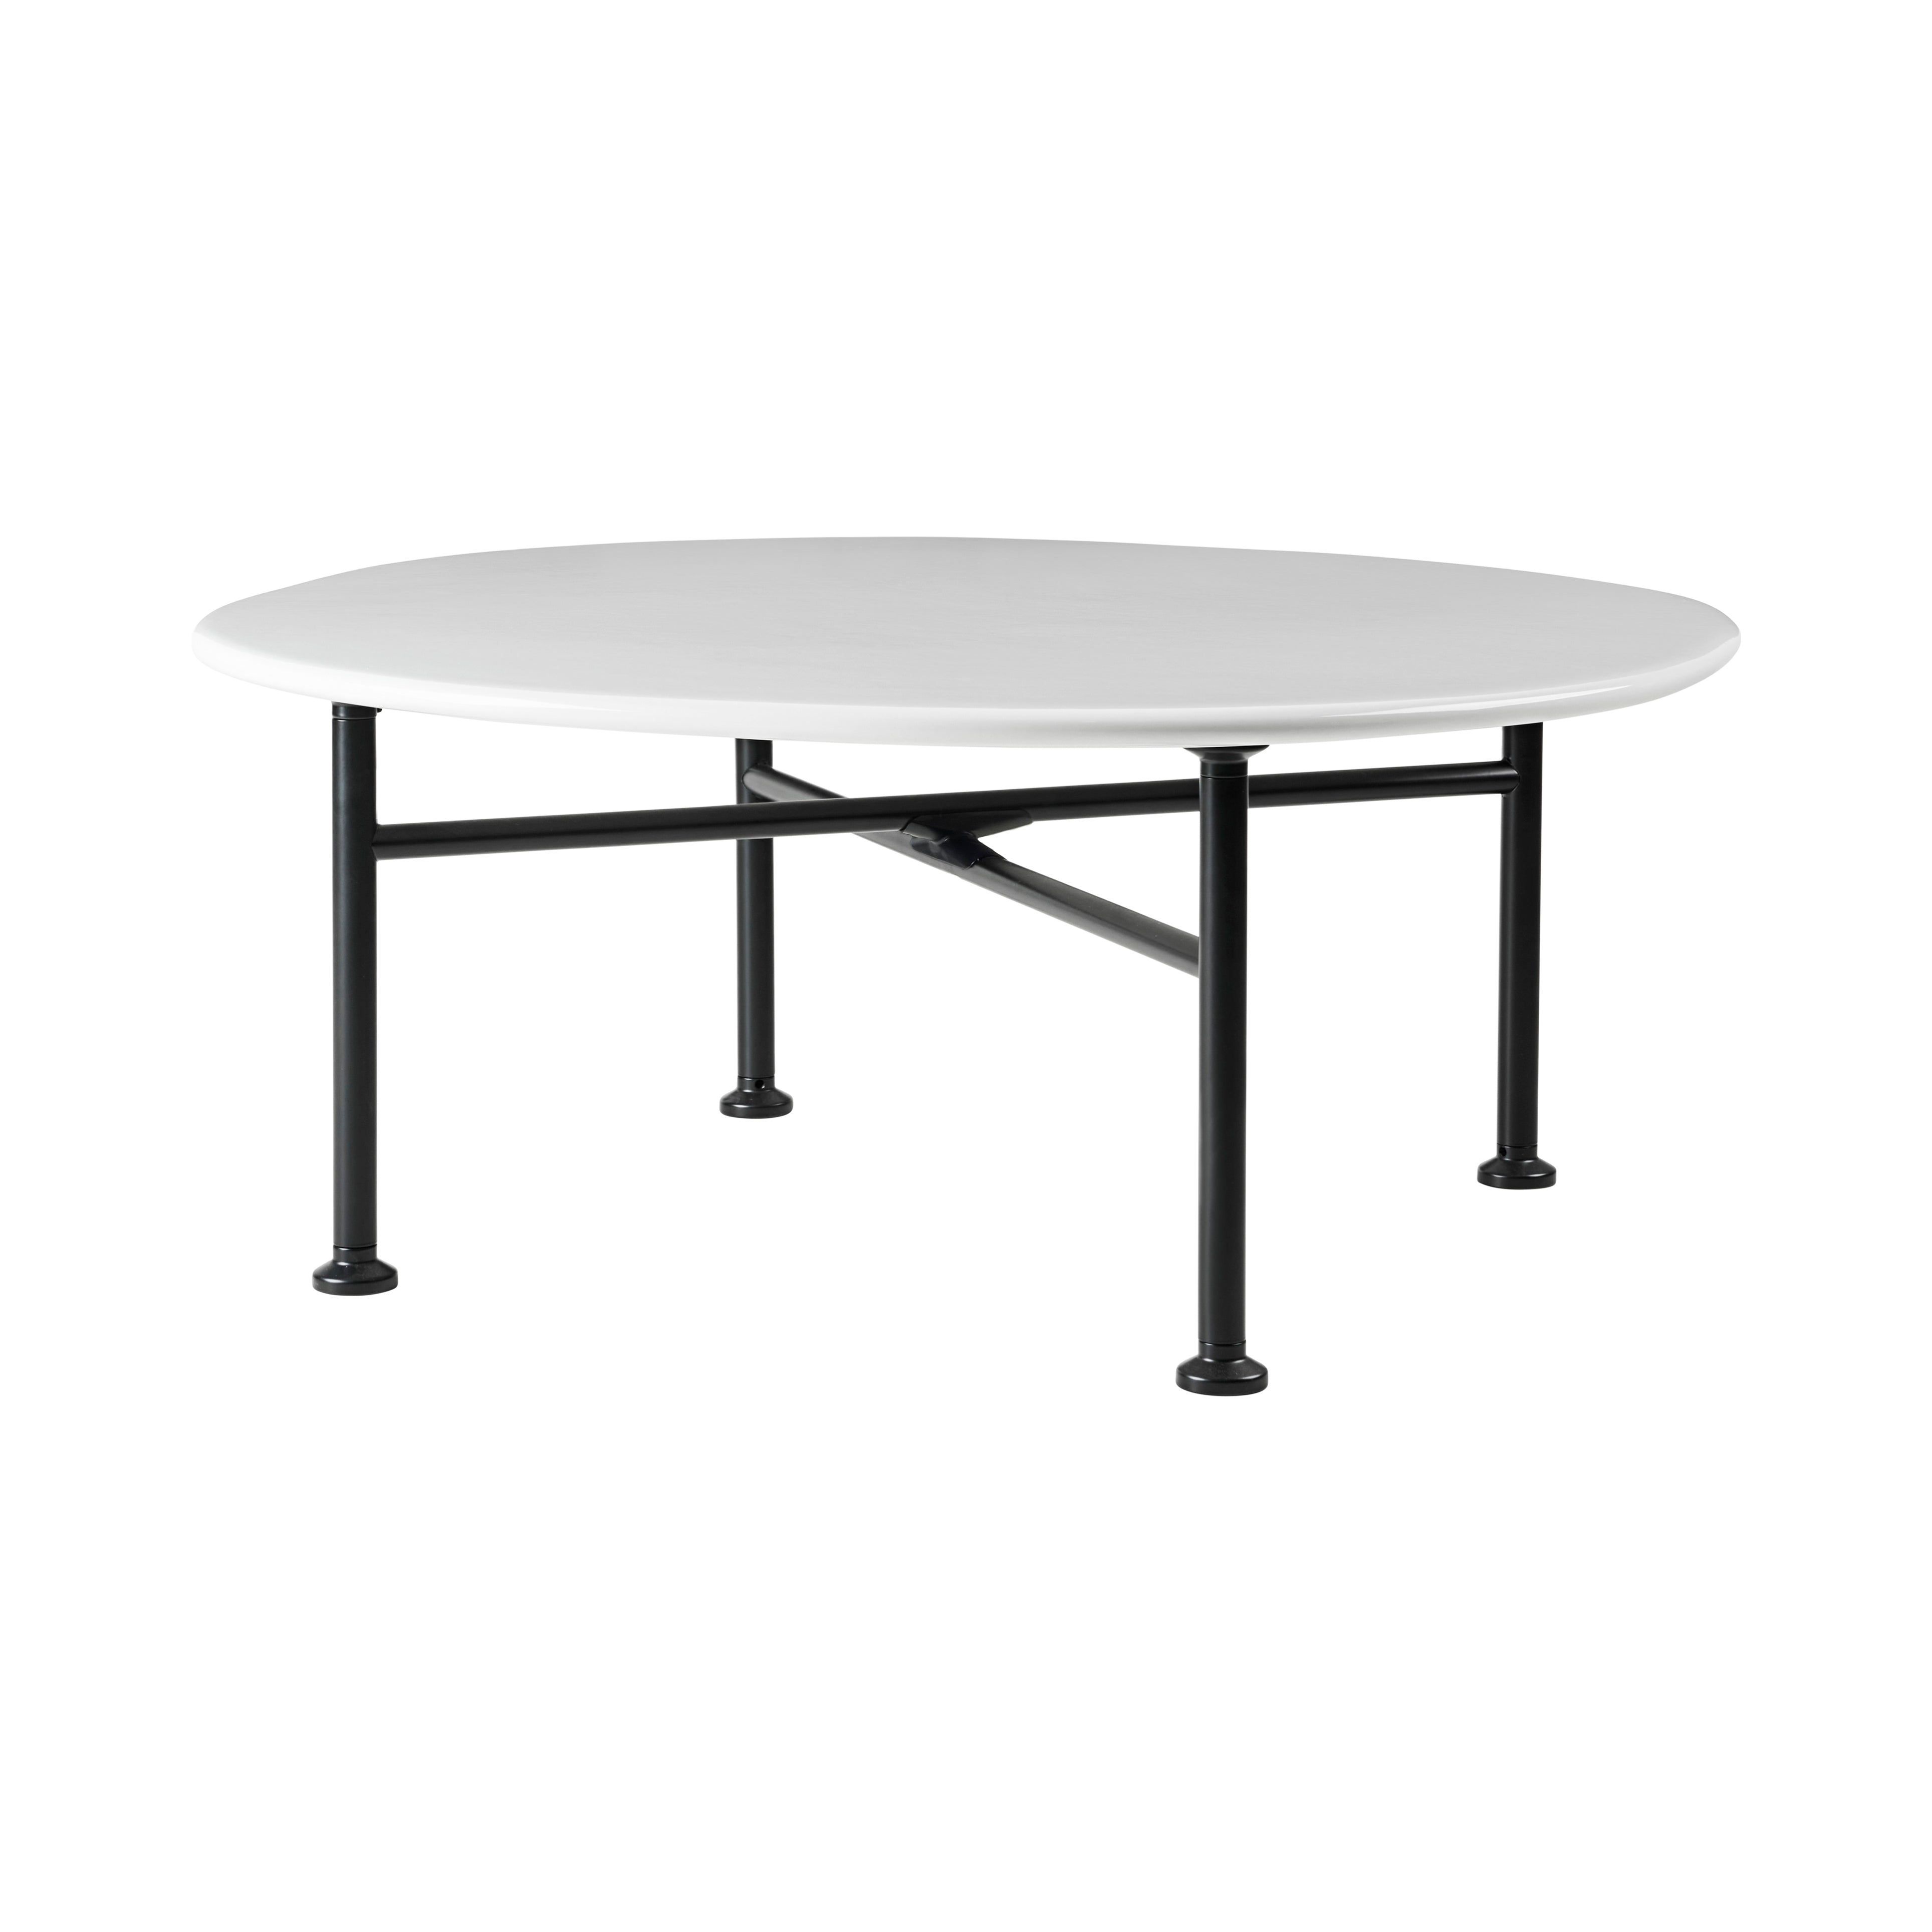 Carmel Outdoor Coffee Table: Square + Large - 29.5